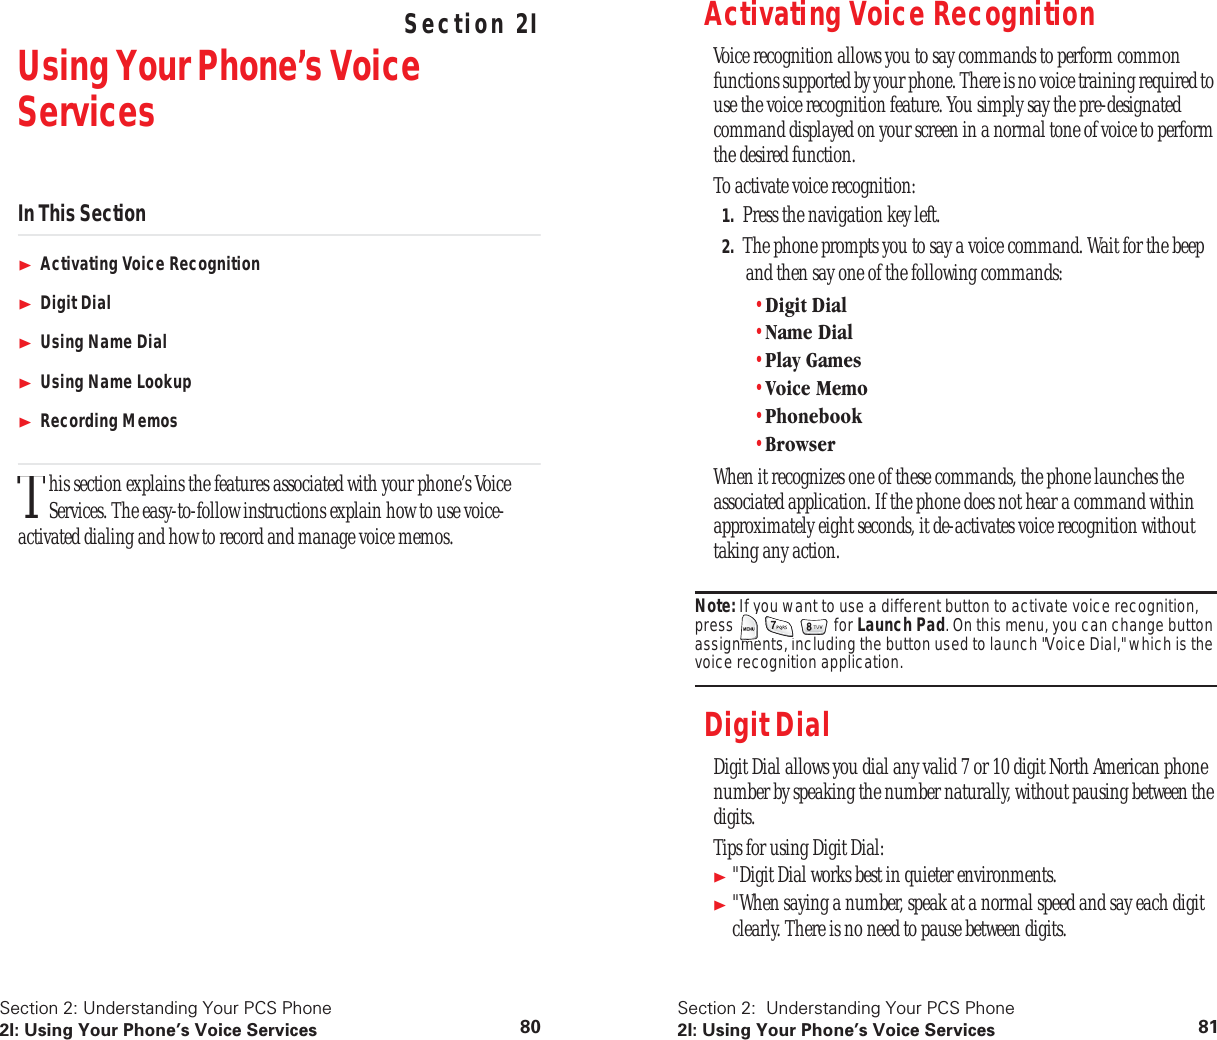 Section 2: Understanding Your PCS Phone2I: Using Your Phone’s Voice Services 80 Understanding Your PCS PhoneSection 2IUsing Your Phone’s Voice ServicesIn This SectionActivating Voice RecognitionDigit DialUsing Name DialUsing Name LookupRecording Memoshis section explains the features associated with your phone’s Voice Services. The easy-to-follow instructions explain how to use voice-activated dialing and how to record and manage voice memos.TSection 2:  Understanding Your PCS Phone2I: Using Your Phone’s Voice Services 81Activating Voice RecognitionVoice recognition allows you to say commands to perform common functions supported by your phone. There is no voice training required to use the voice recognition feature. You simply say the pre-designated command displayed on your screen in a normal tone of voice to perform the desired function.To activate voice recognition:1. Press the navigation key left.2. The phone prompts you to say a voice command. Wait for the beep and then say one of the following commands:•Digit Dial•Name Dial•Play Games•Voice Memo•Phonebook•BrowserWhen it recognizes one of these commands, the phone launches the associated application. If the phone does not hear a command within approximately eight seconds, it de-activates voice recognition without taking any action.Note: If you want to use a different button to activate voice recognition, press      for Launch Pad. On this menu, you can change button assignments, including the button used to launch &quot;Voice Dial,&quot; which is the voice recognition application.Digit DialDigit Dial allows you dial any valid 7 or 10 digit North American phone number by speaking the number naturally, without pausing between the digits.Tips for using Digit Dial:&quot;Digit Dial works best in quieter environments.&quot;When saying a number, speak at a normal speed and say each digit clearly. There is no need to pause between digits.